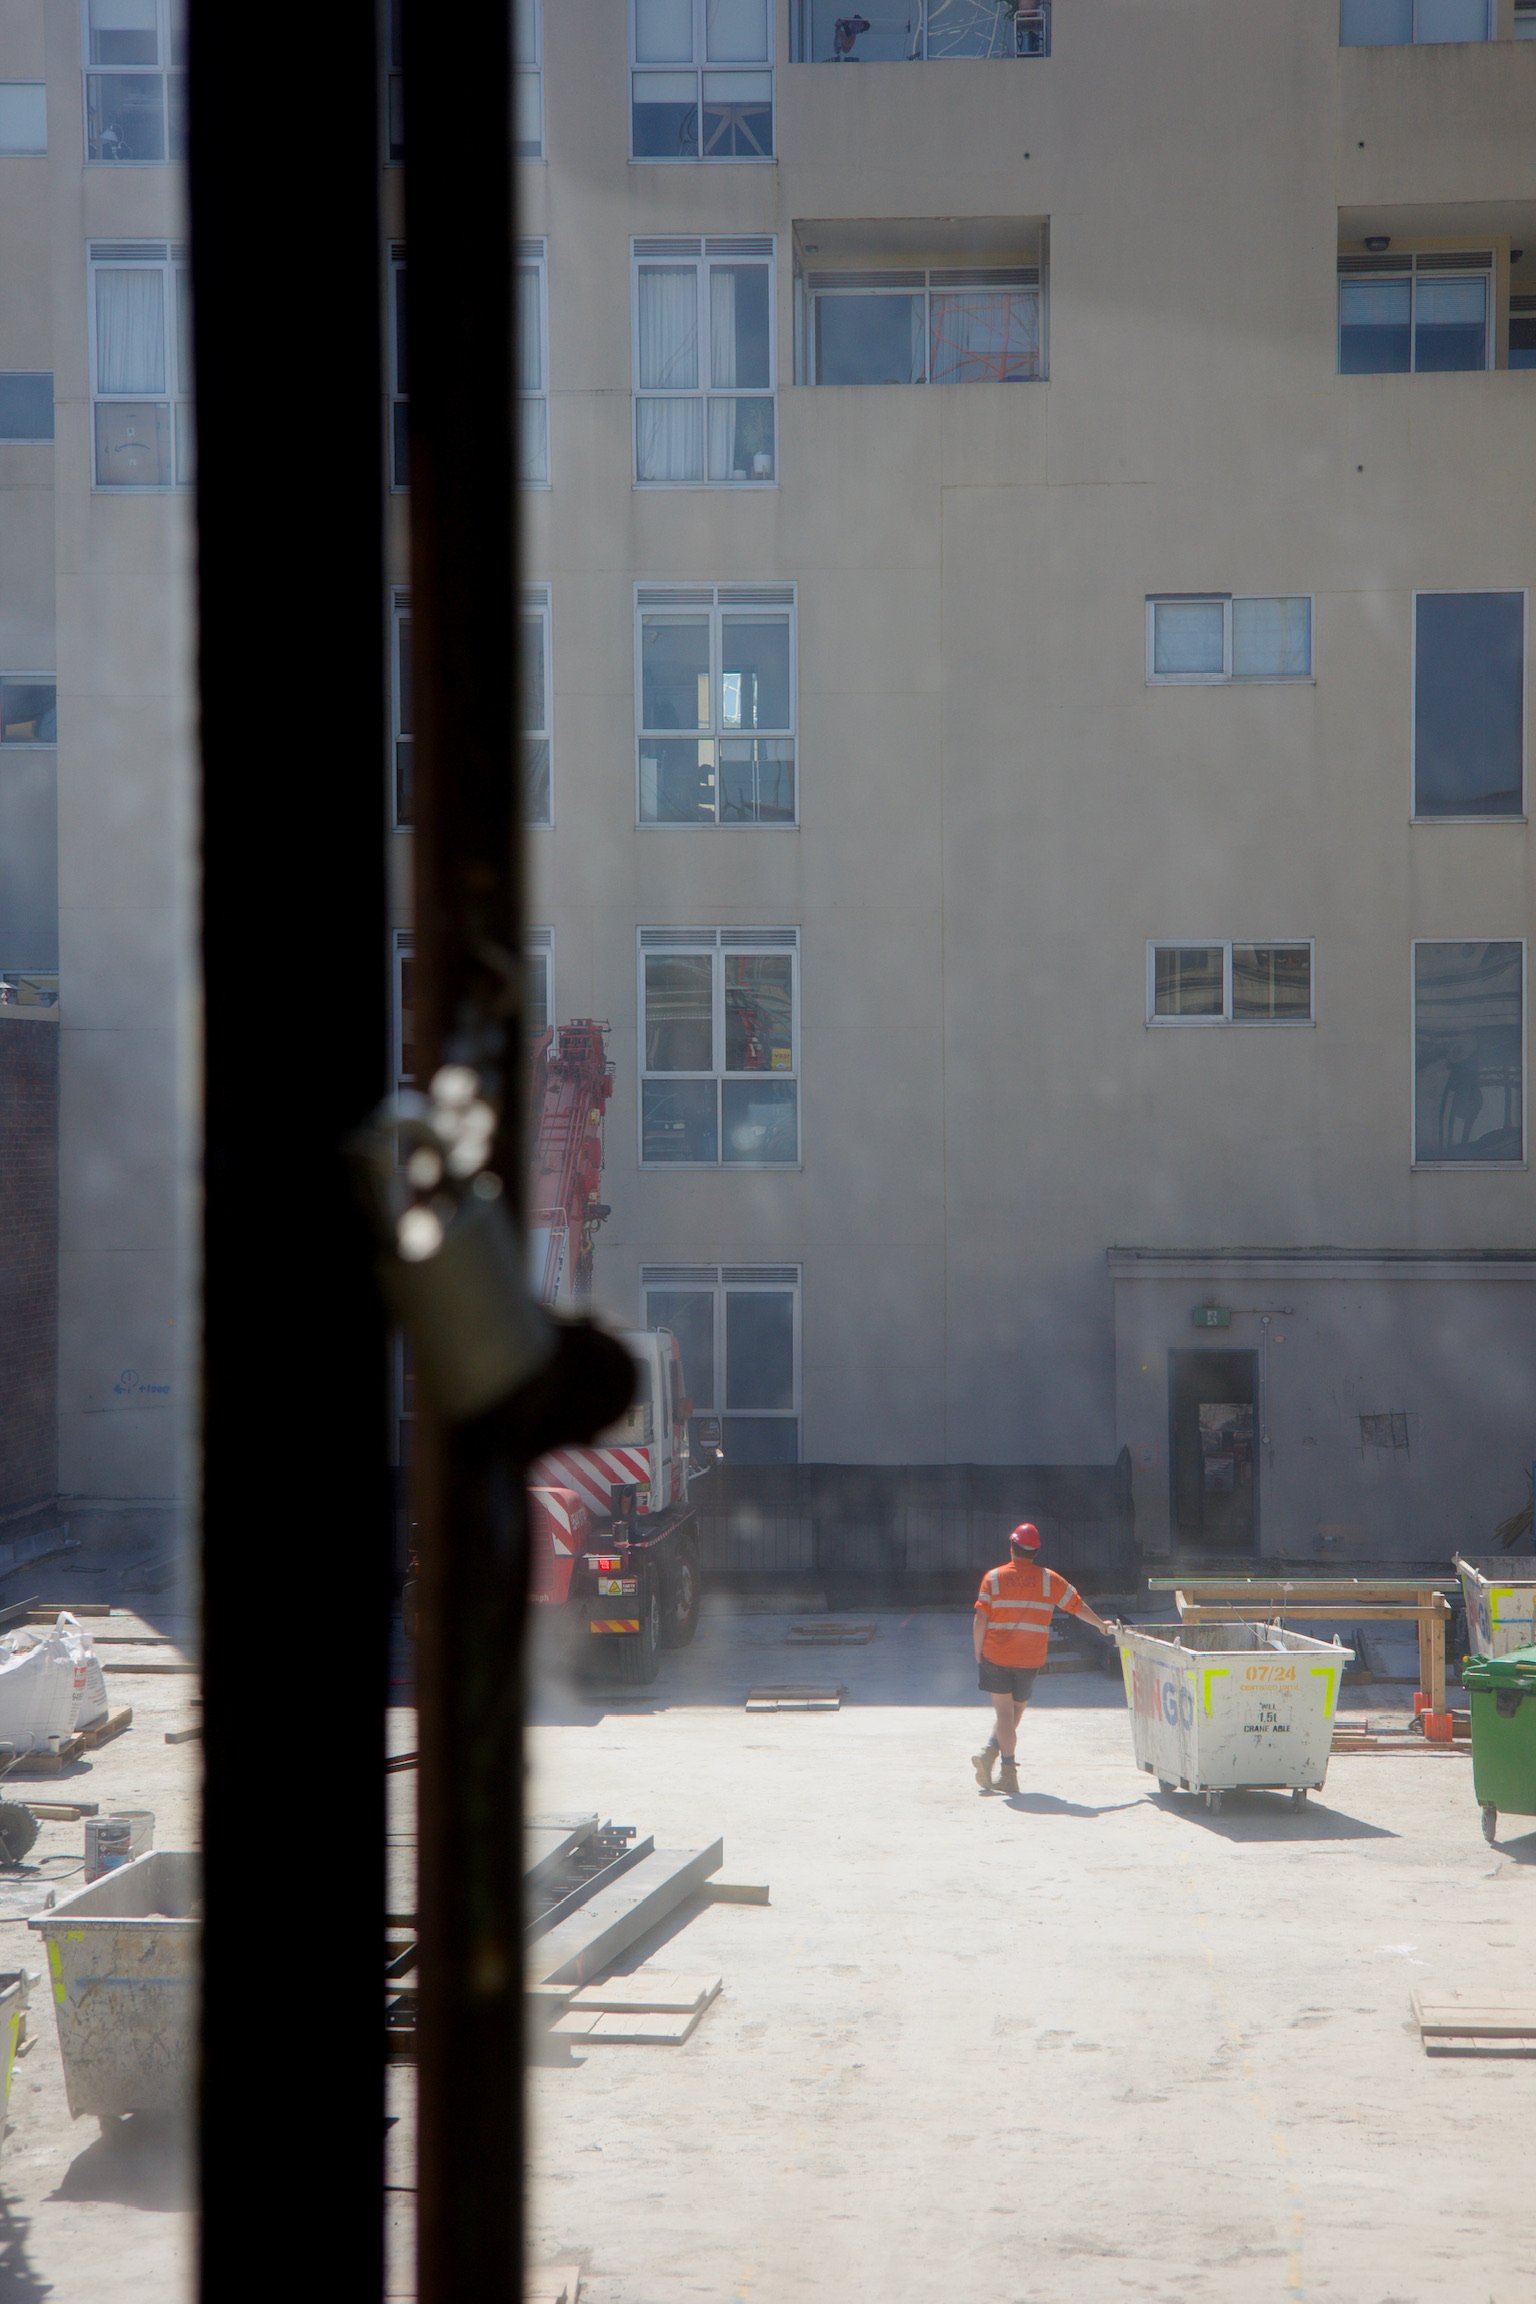 through a window, a person standing on a rooftop construction site wearing a bright orange vest